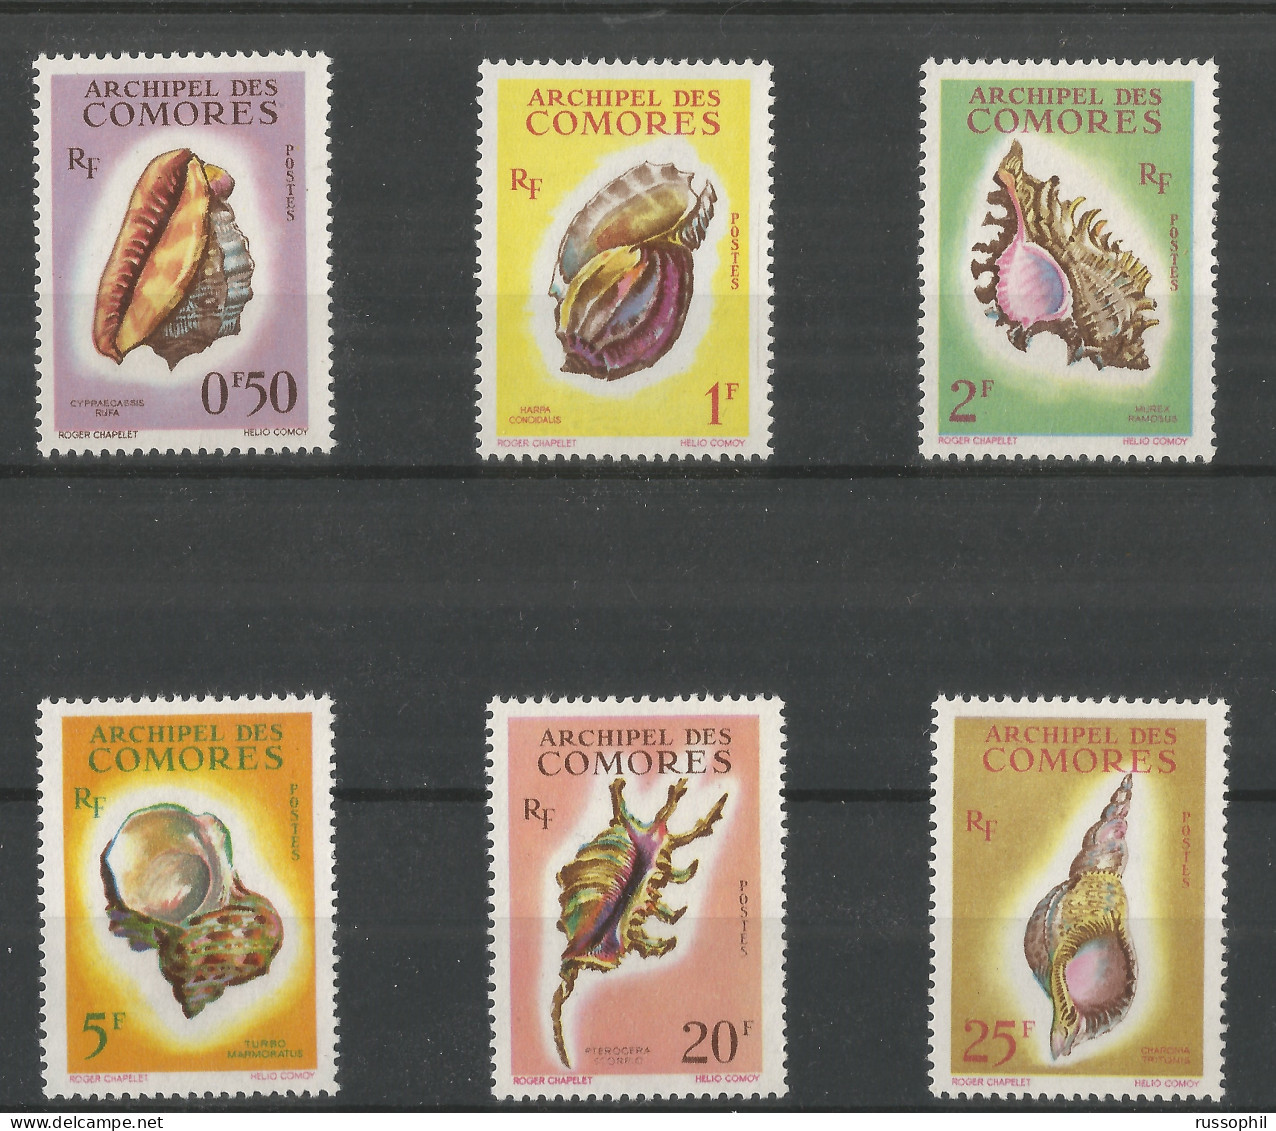 COMORES - COQUILLAGES -  SHELLFISH - Yv. #19 TO Yv. #24 -  (**/MNH) - 1962 - Neufs